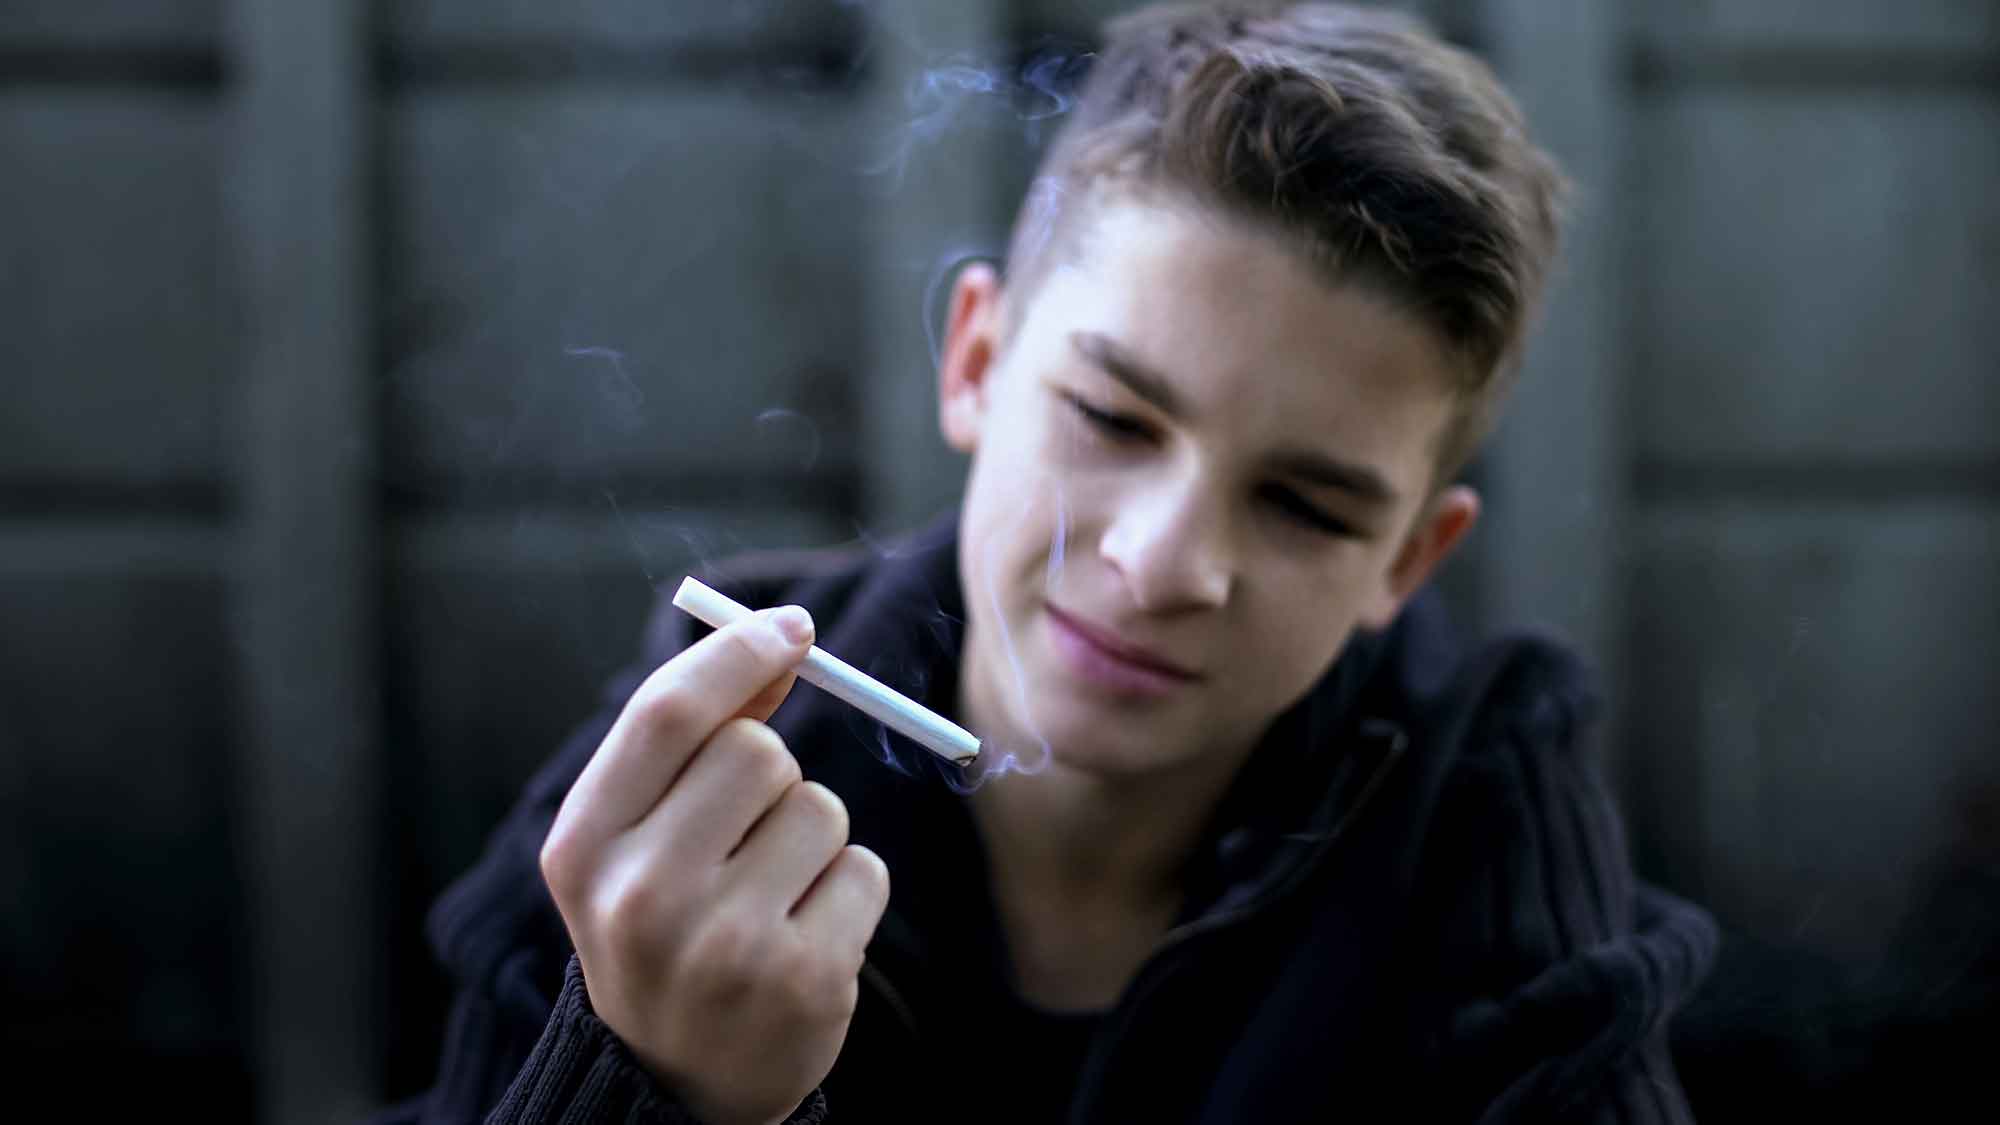 Percentage of children smoking continues in downward trend